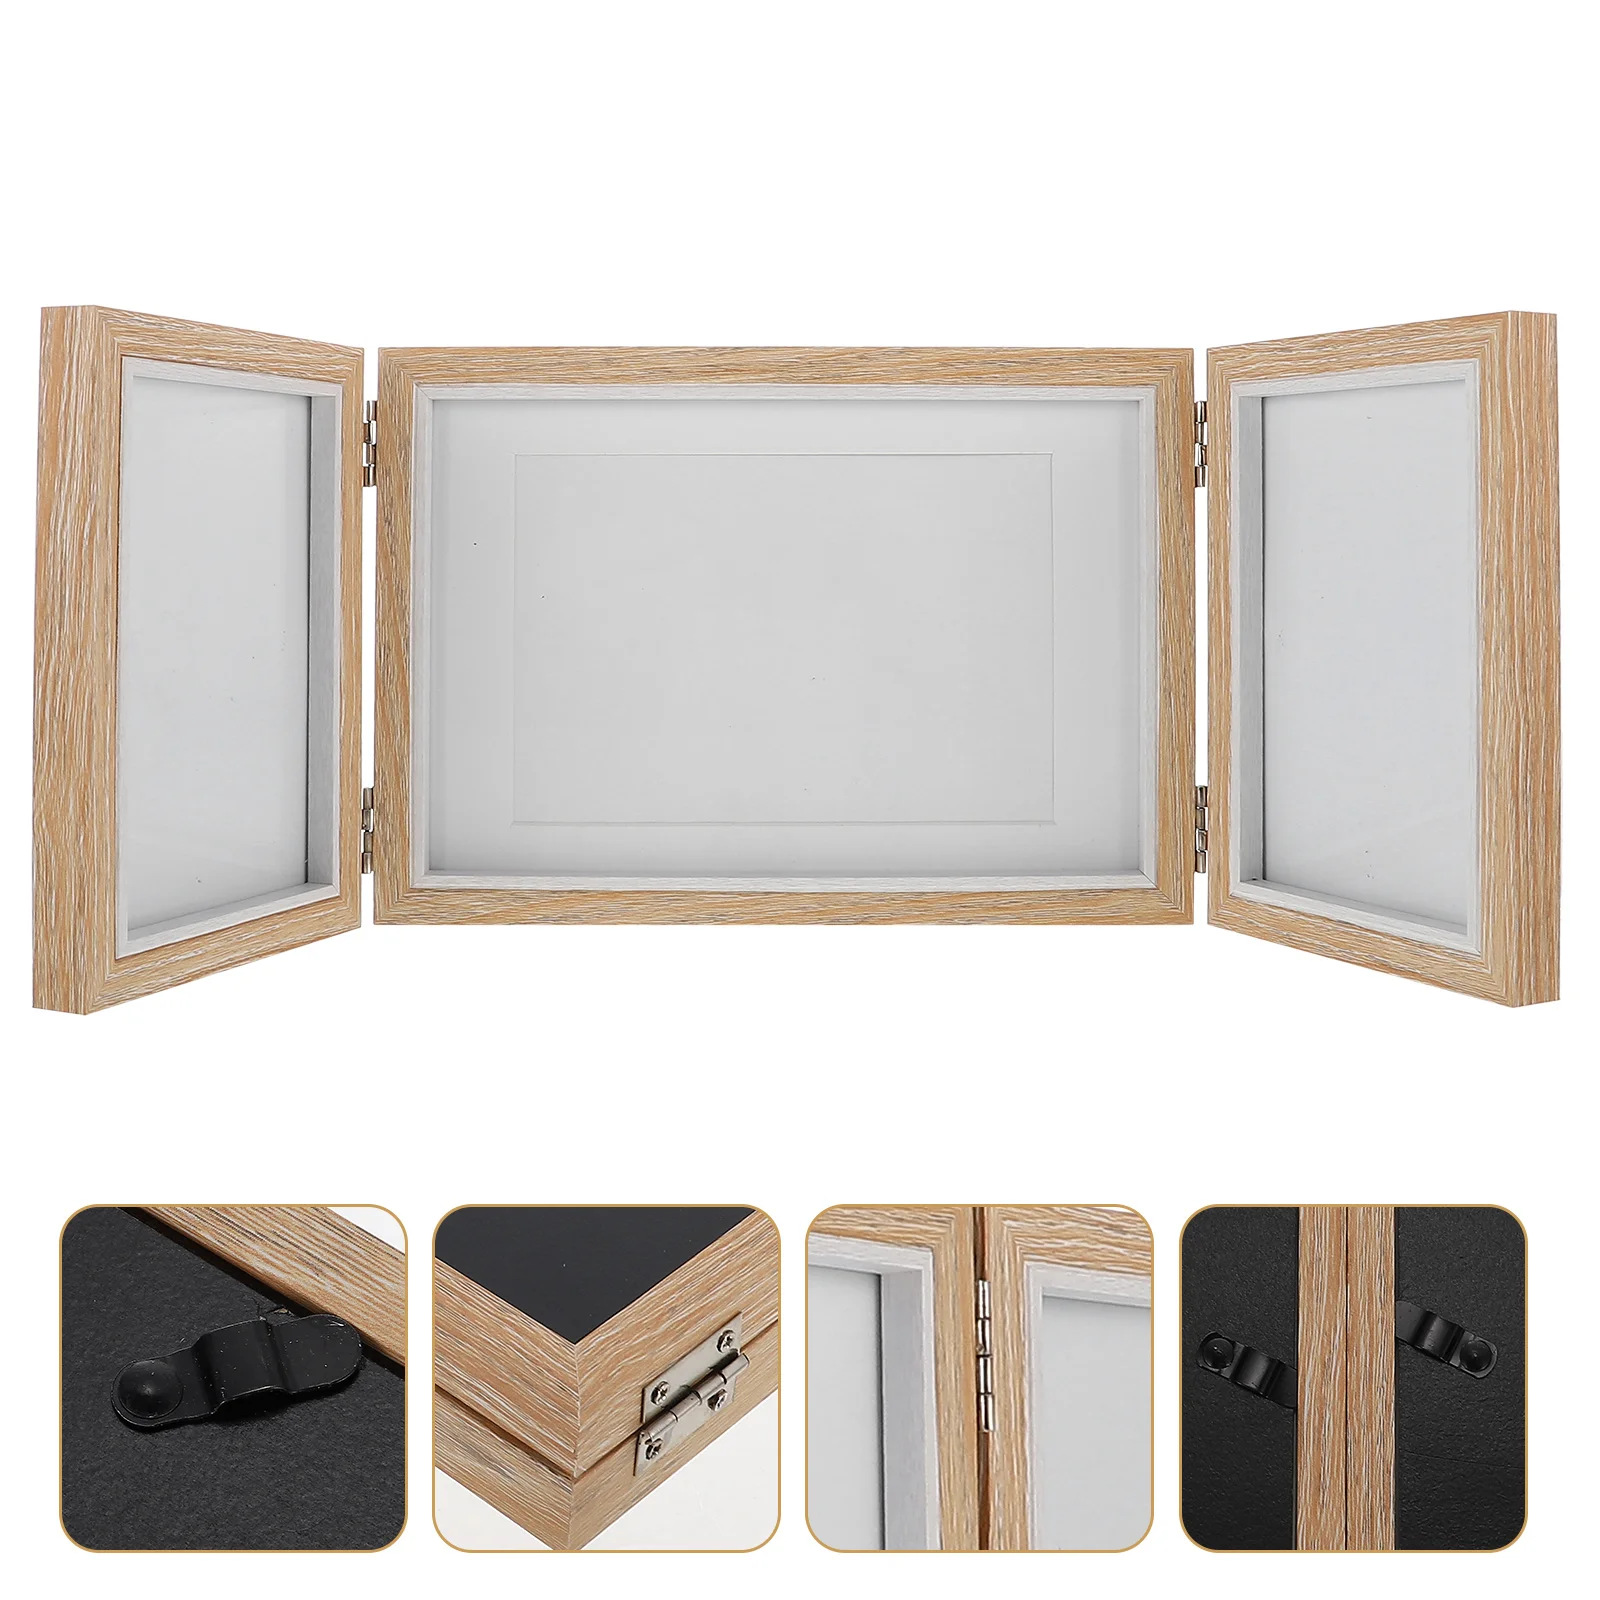 

Siamese Assembled Photo Frame Fodable Pic Foldable Wooden Decor Display Picture Baby